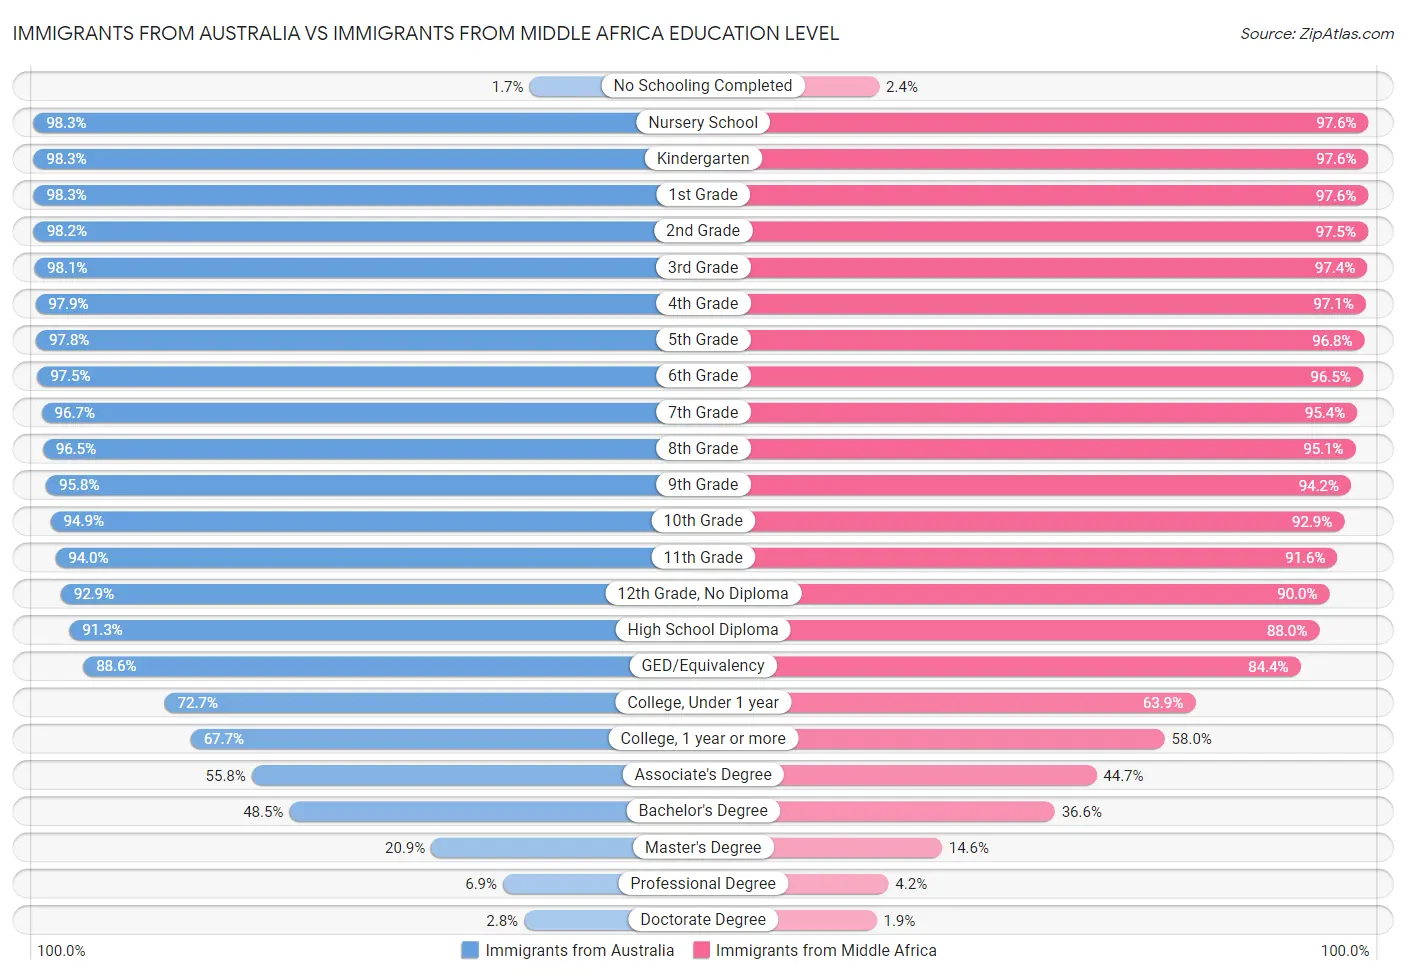 Immigrants from Australia vs Immigrants from Middle Africa Education Level